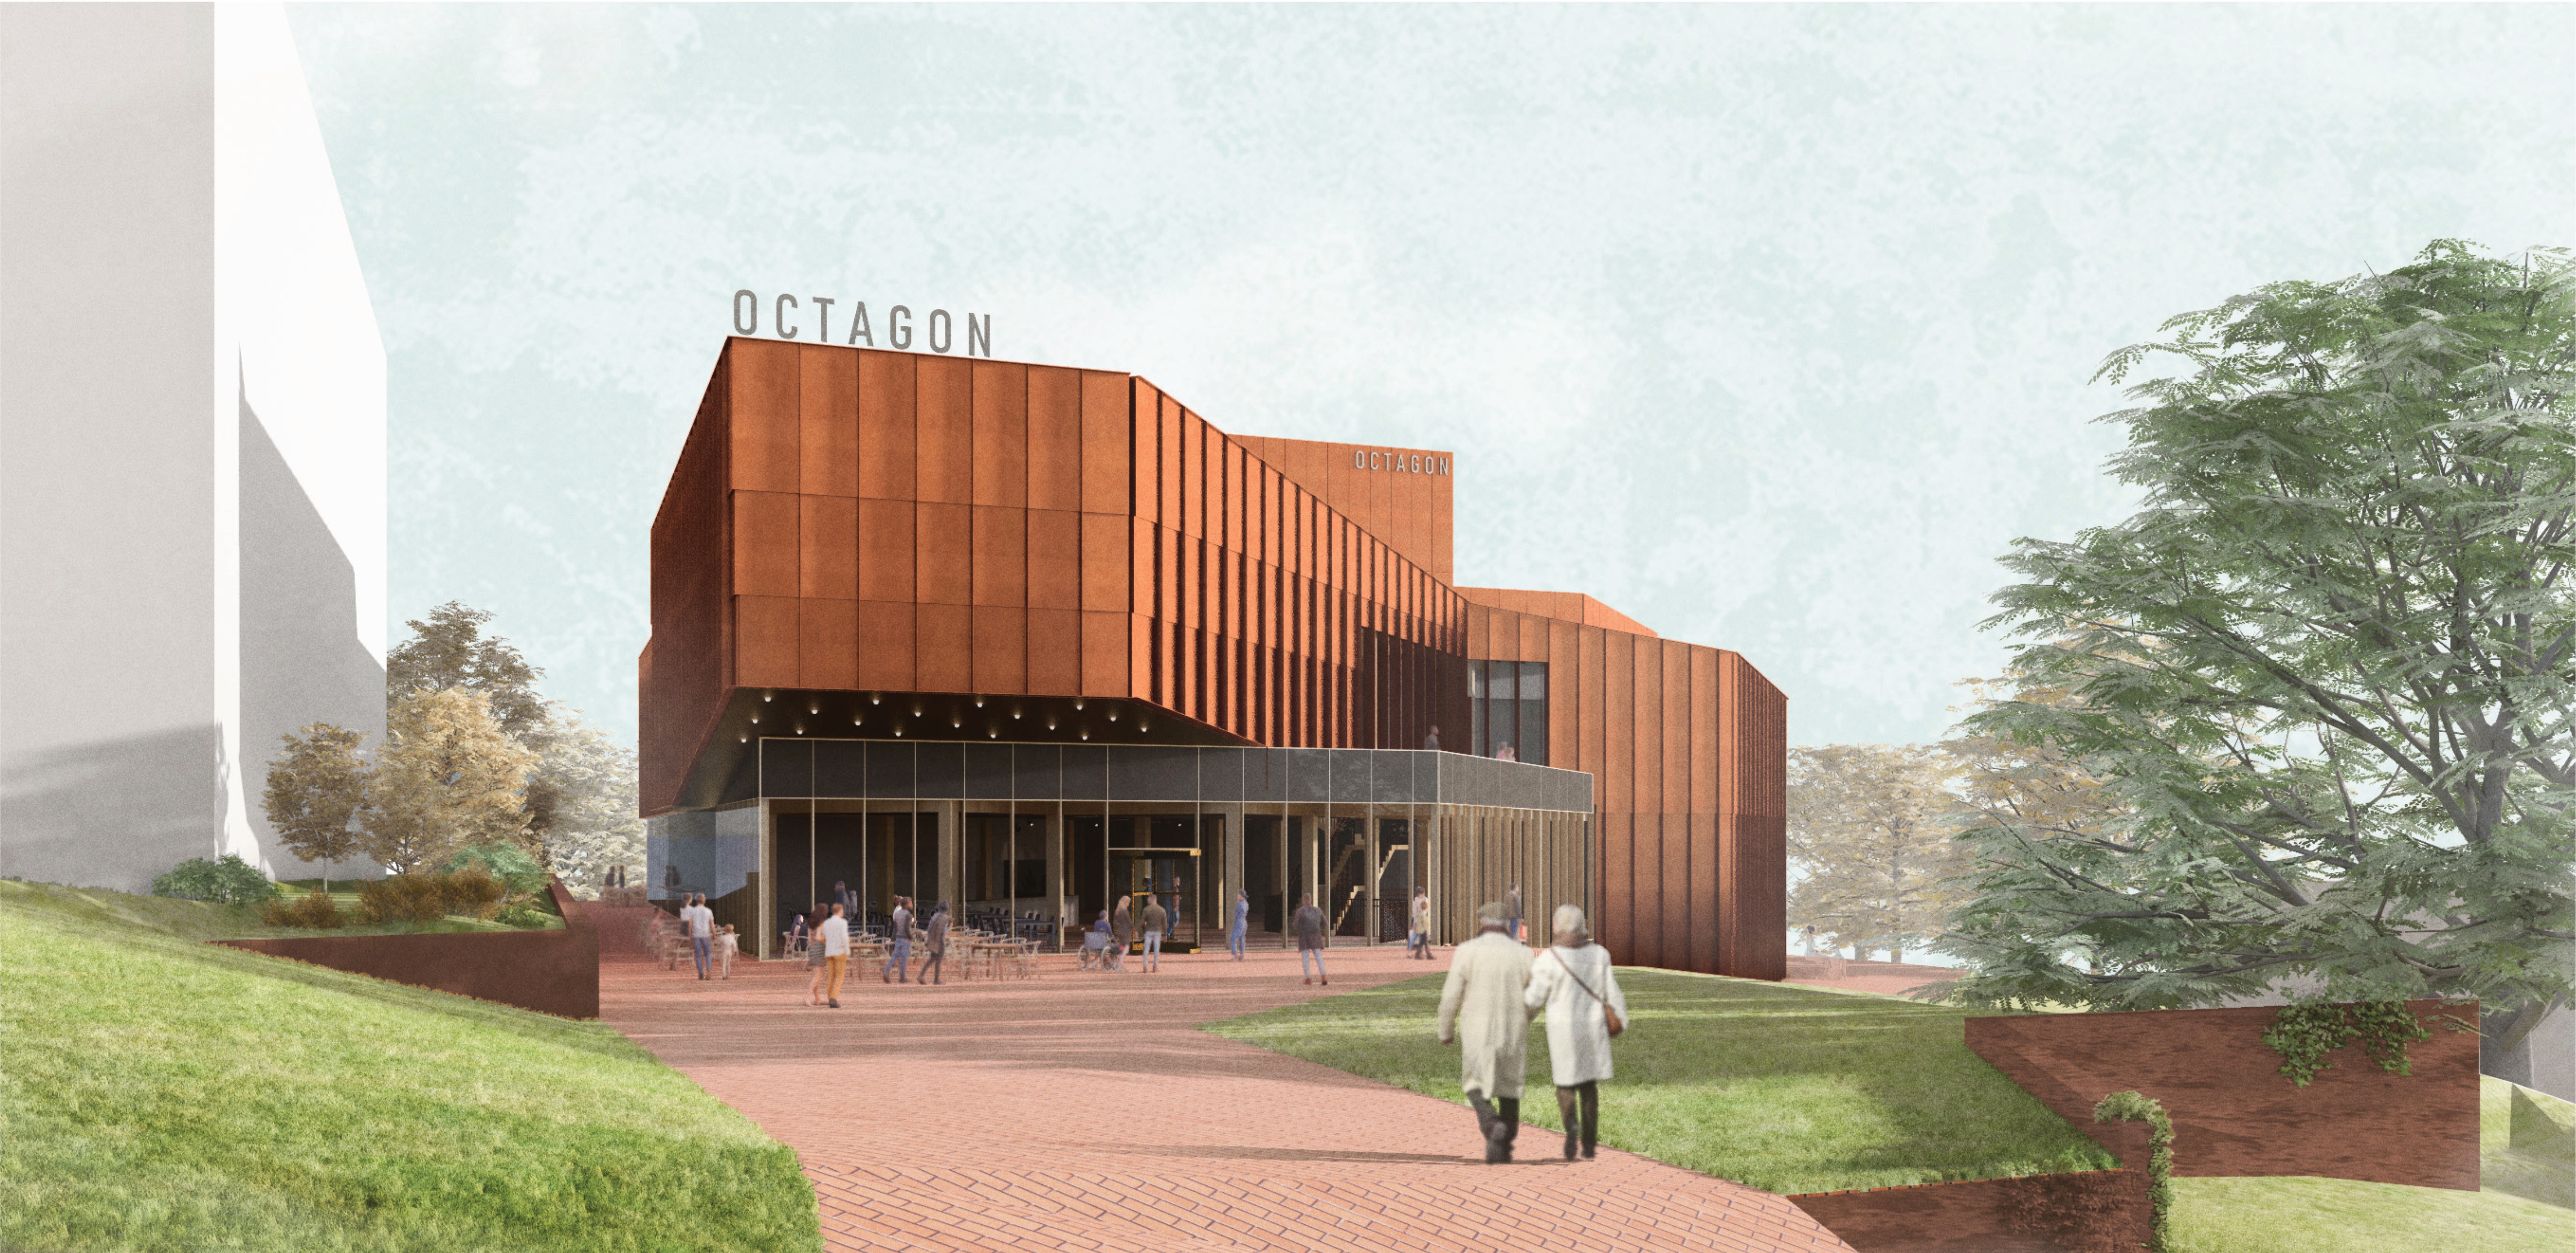 An artists impression of The Octagon Theatre from the current car park area.